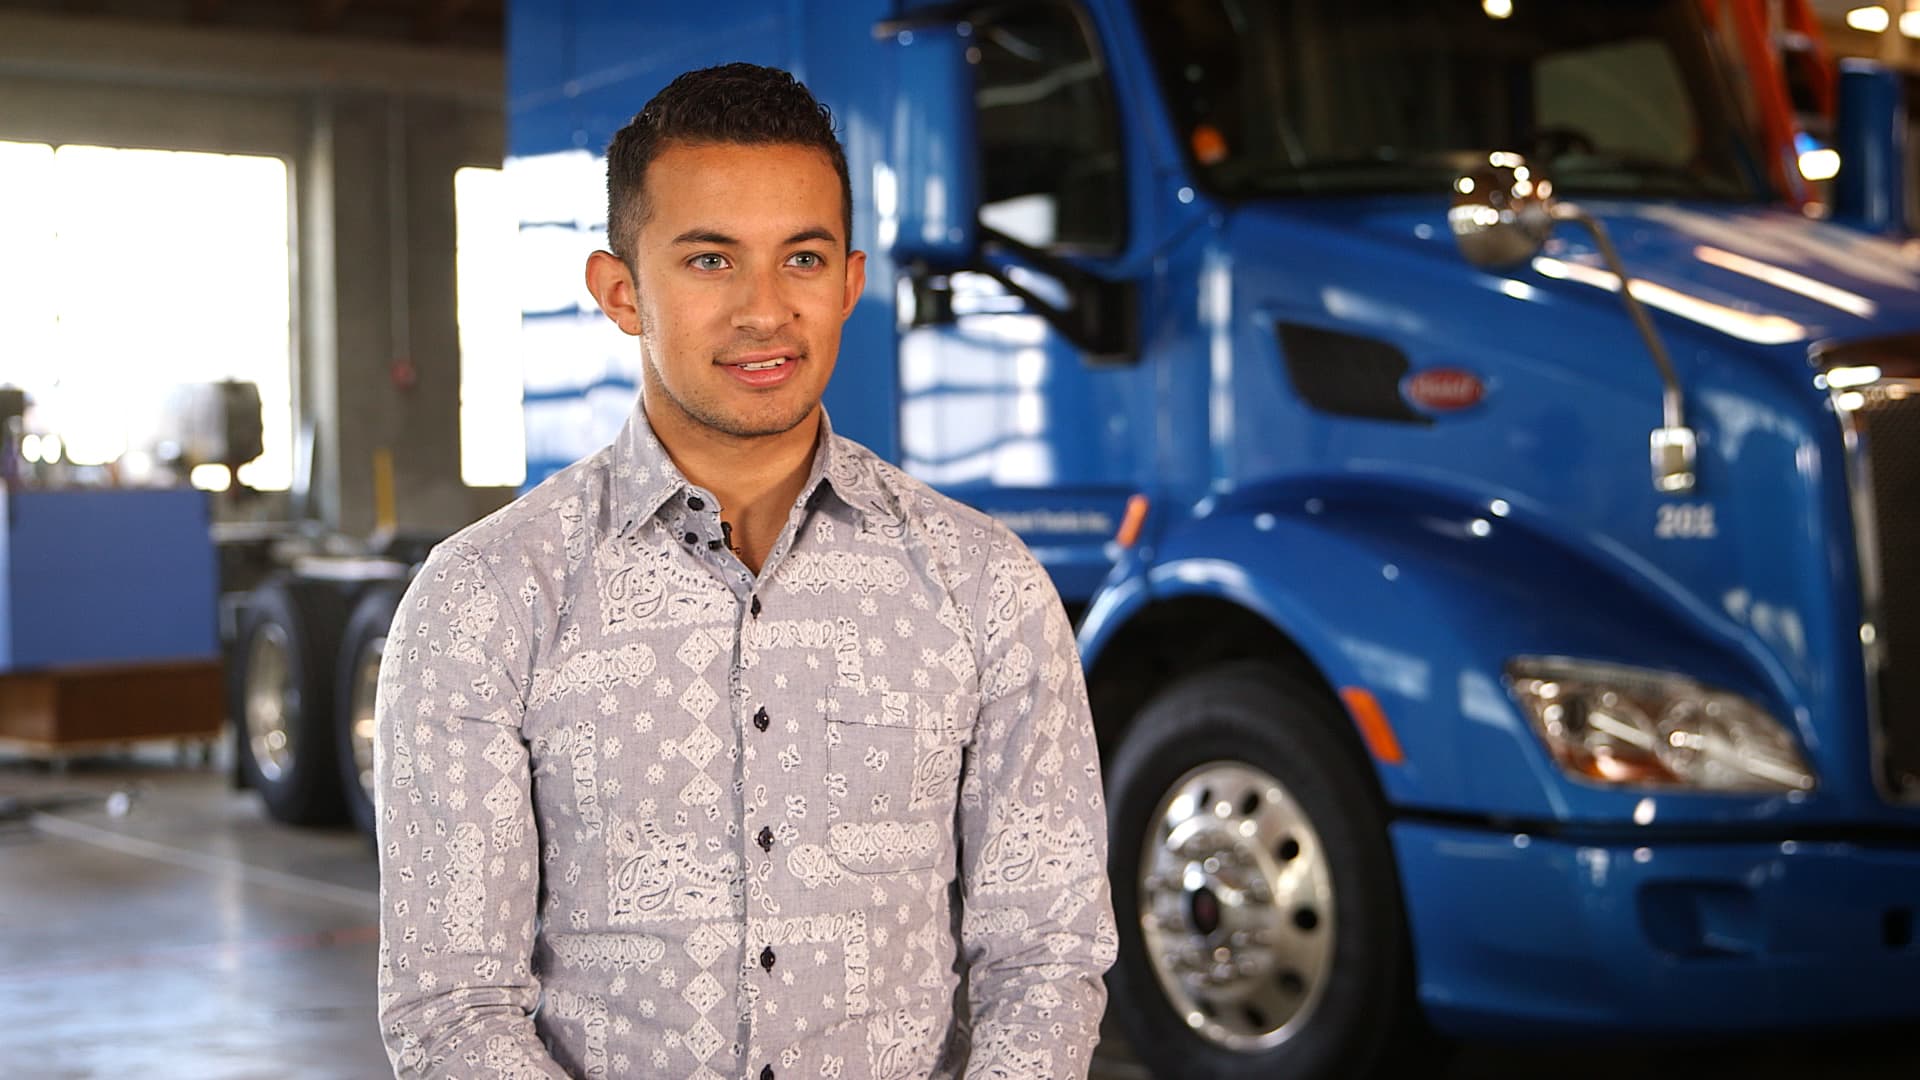 26-year-old CEO completes SPAC deal and brings his autonomous trucking start-up Embark public